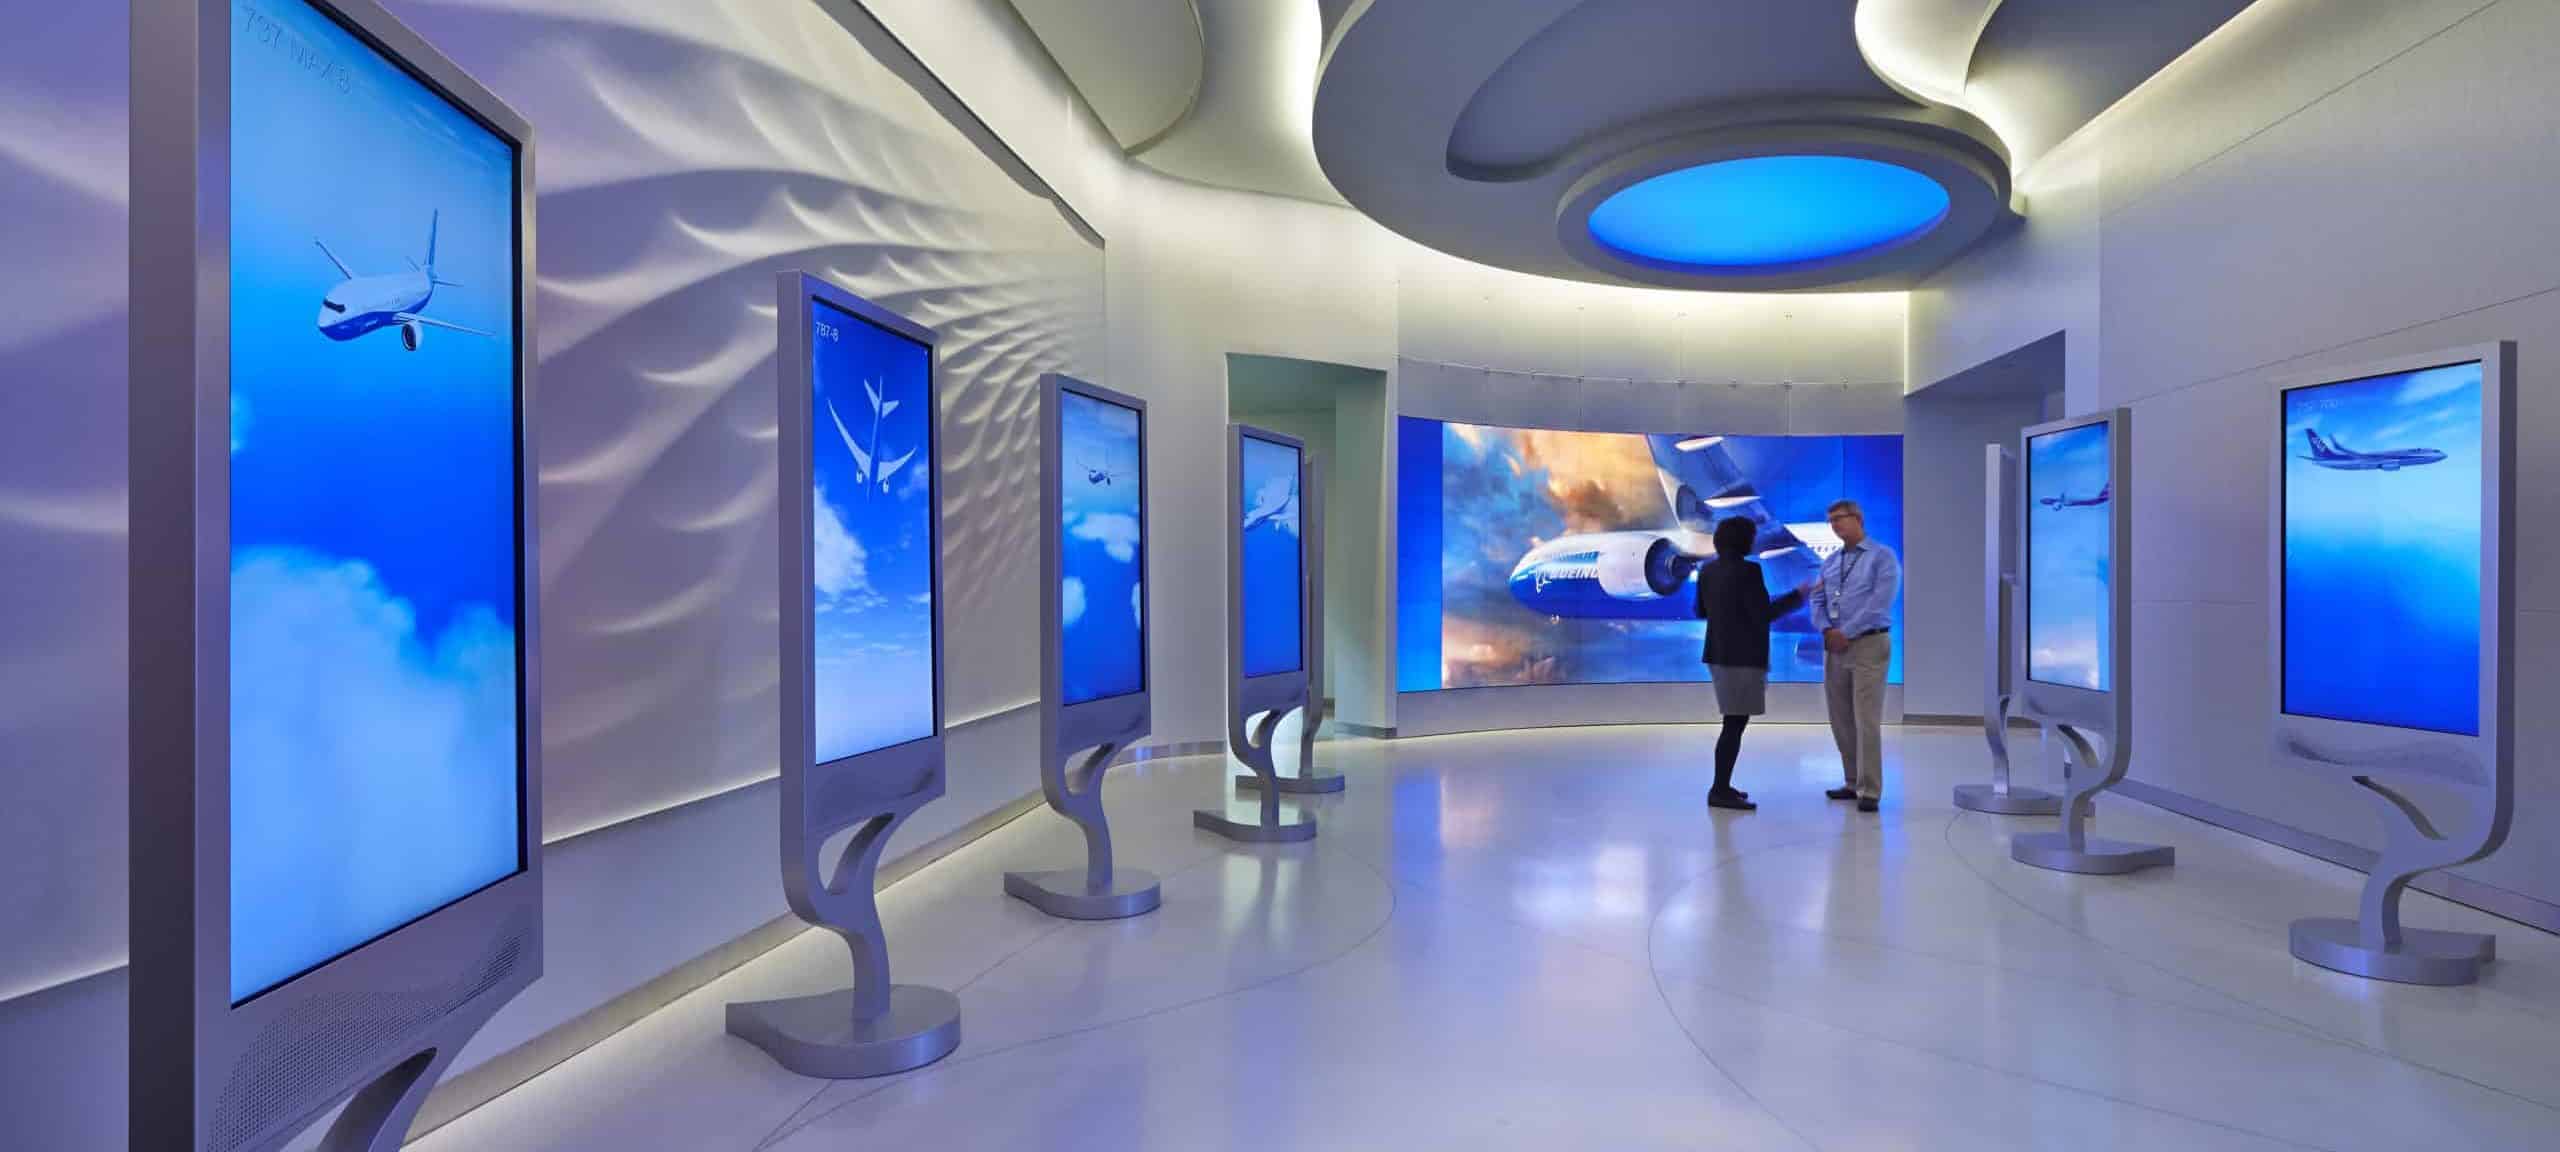 Immersive corporate digital signage at Boeing